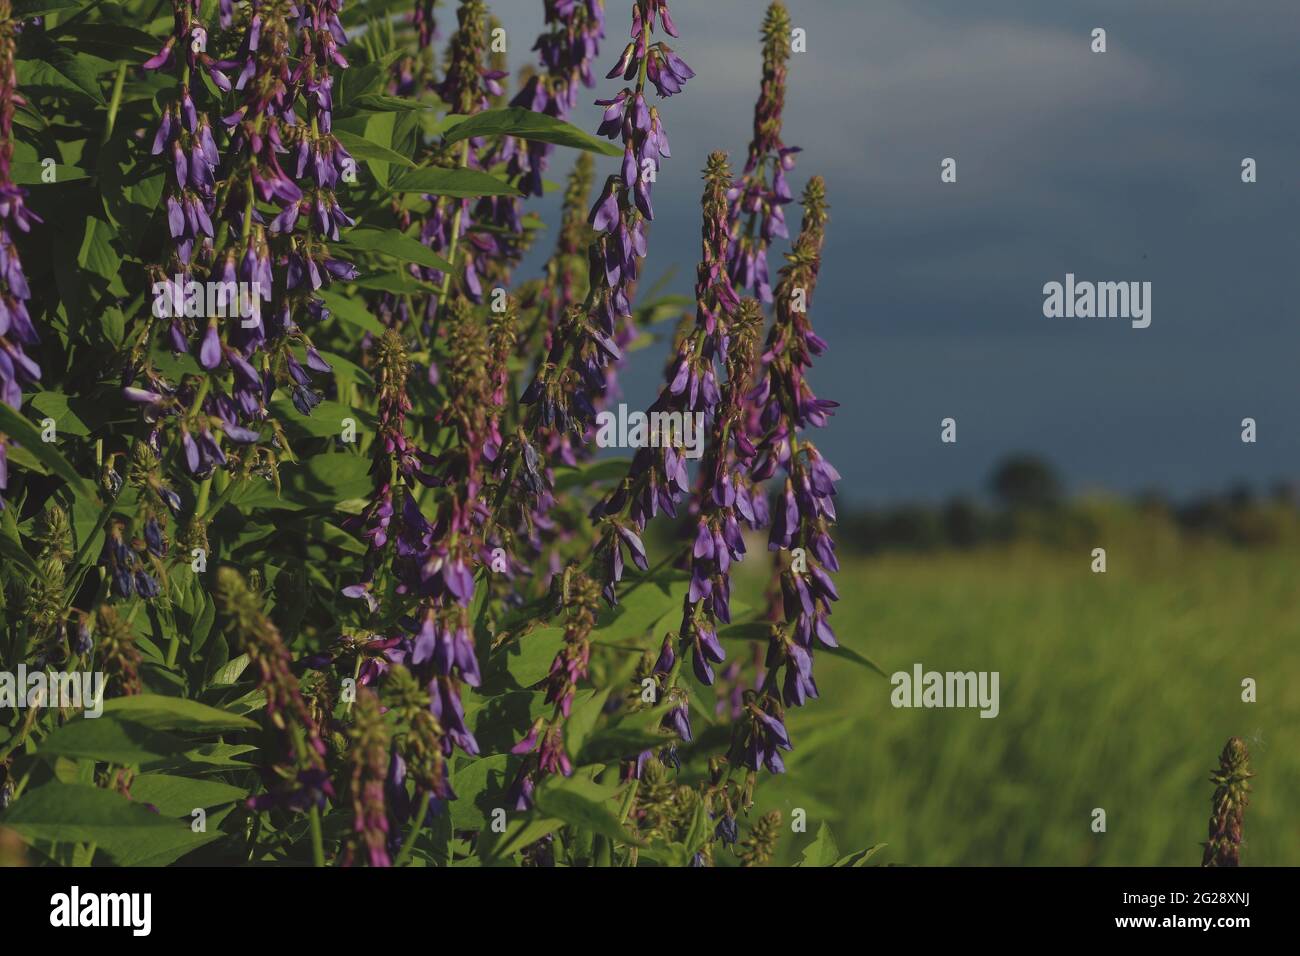 Eastern Goat's-rue, Galega orientalis. A bush of purple flowers against a background of a green meadow and a dark pre-storm sky in clouds. Stock Photo